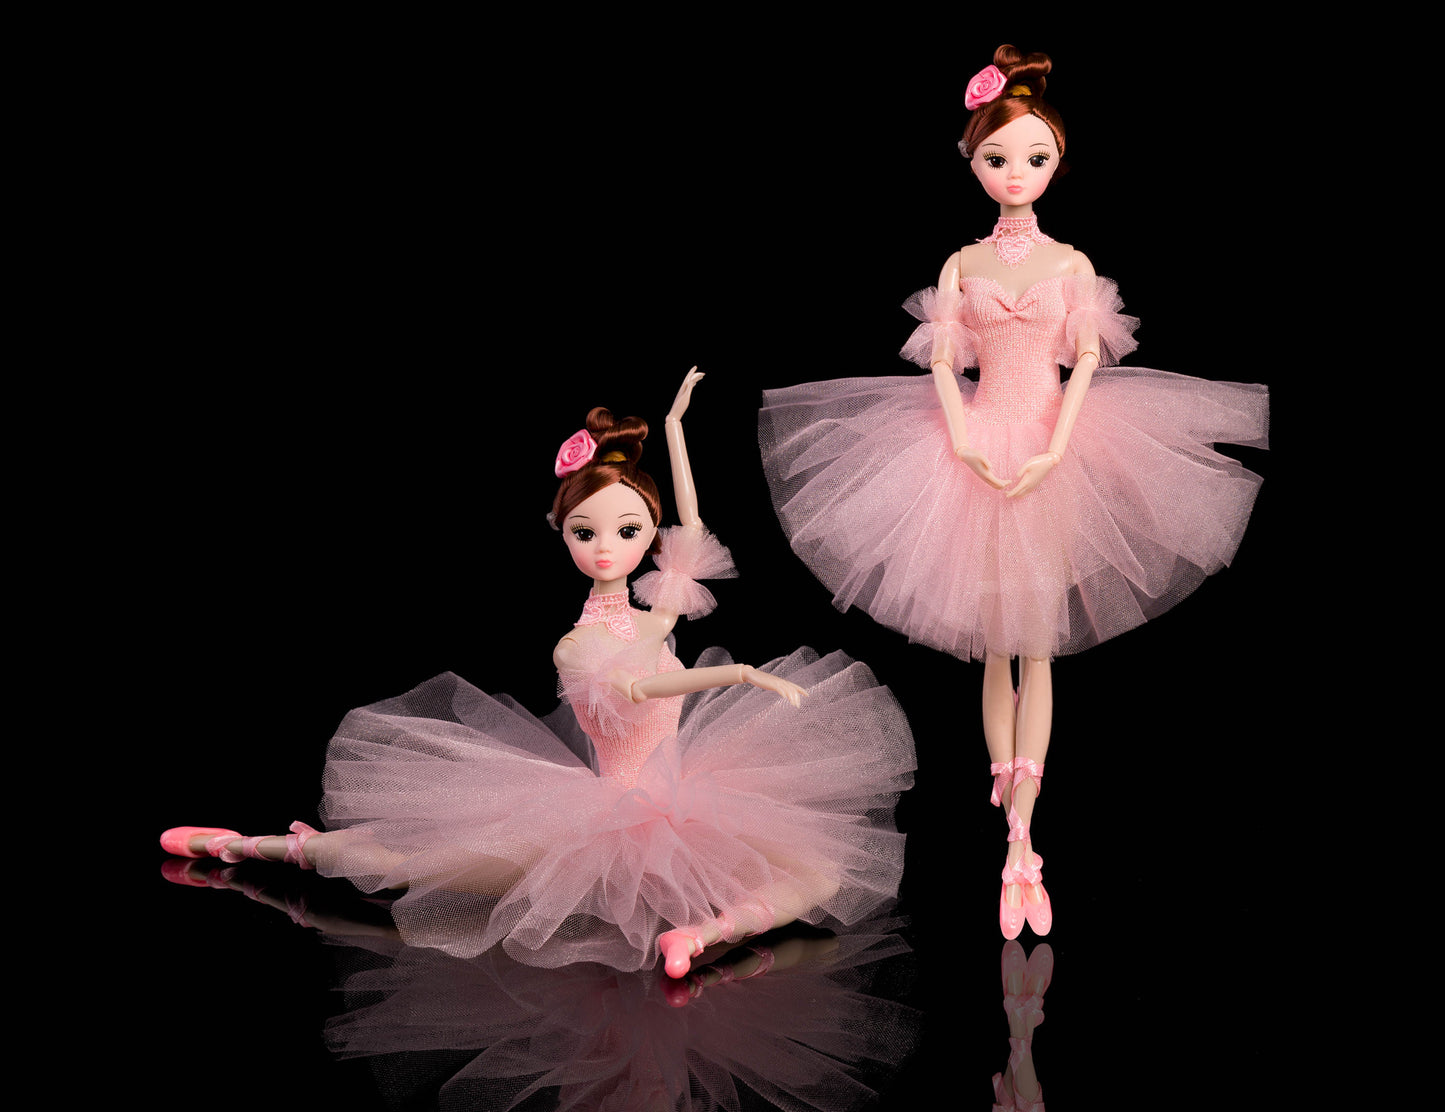 DOLLY® BALLERINA DOLL WITH PINK TUTU DRESS - Bjd 12 joints 12 inch 30 cm 1/6 scale fashion doll